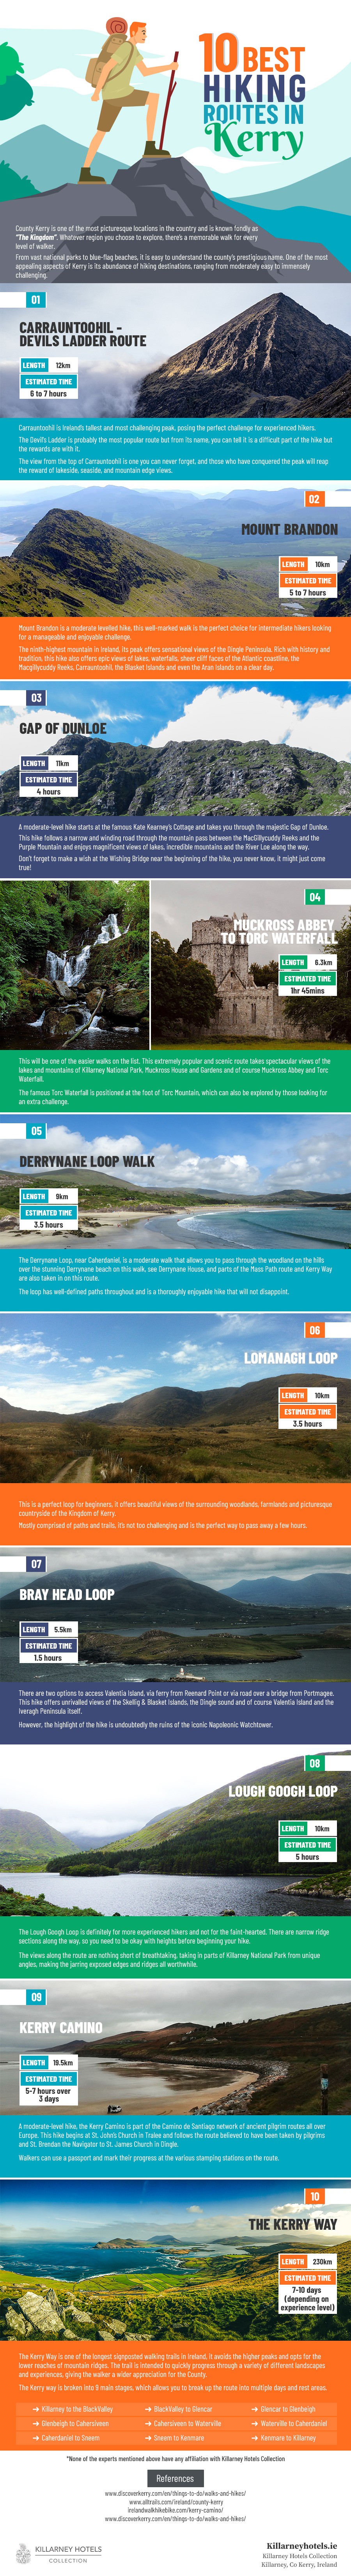 10 Best Hiking Routes in Kerry infographic